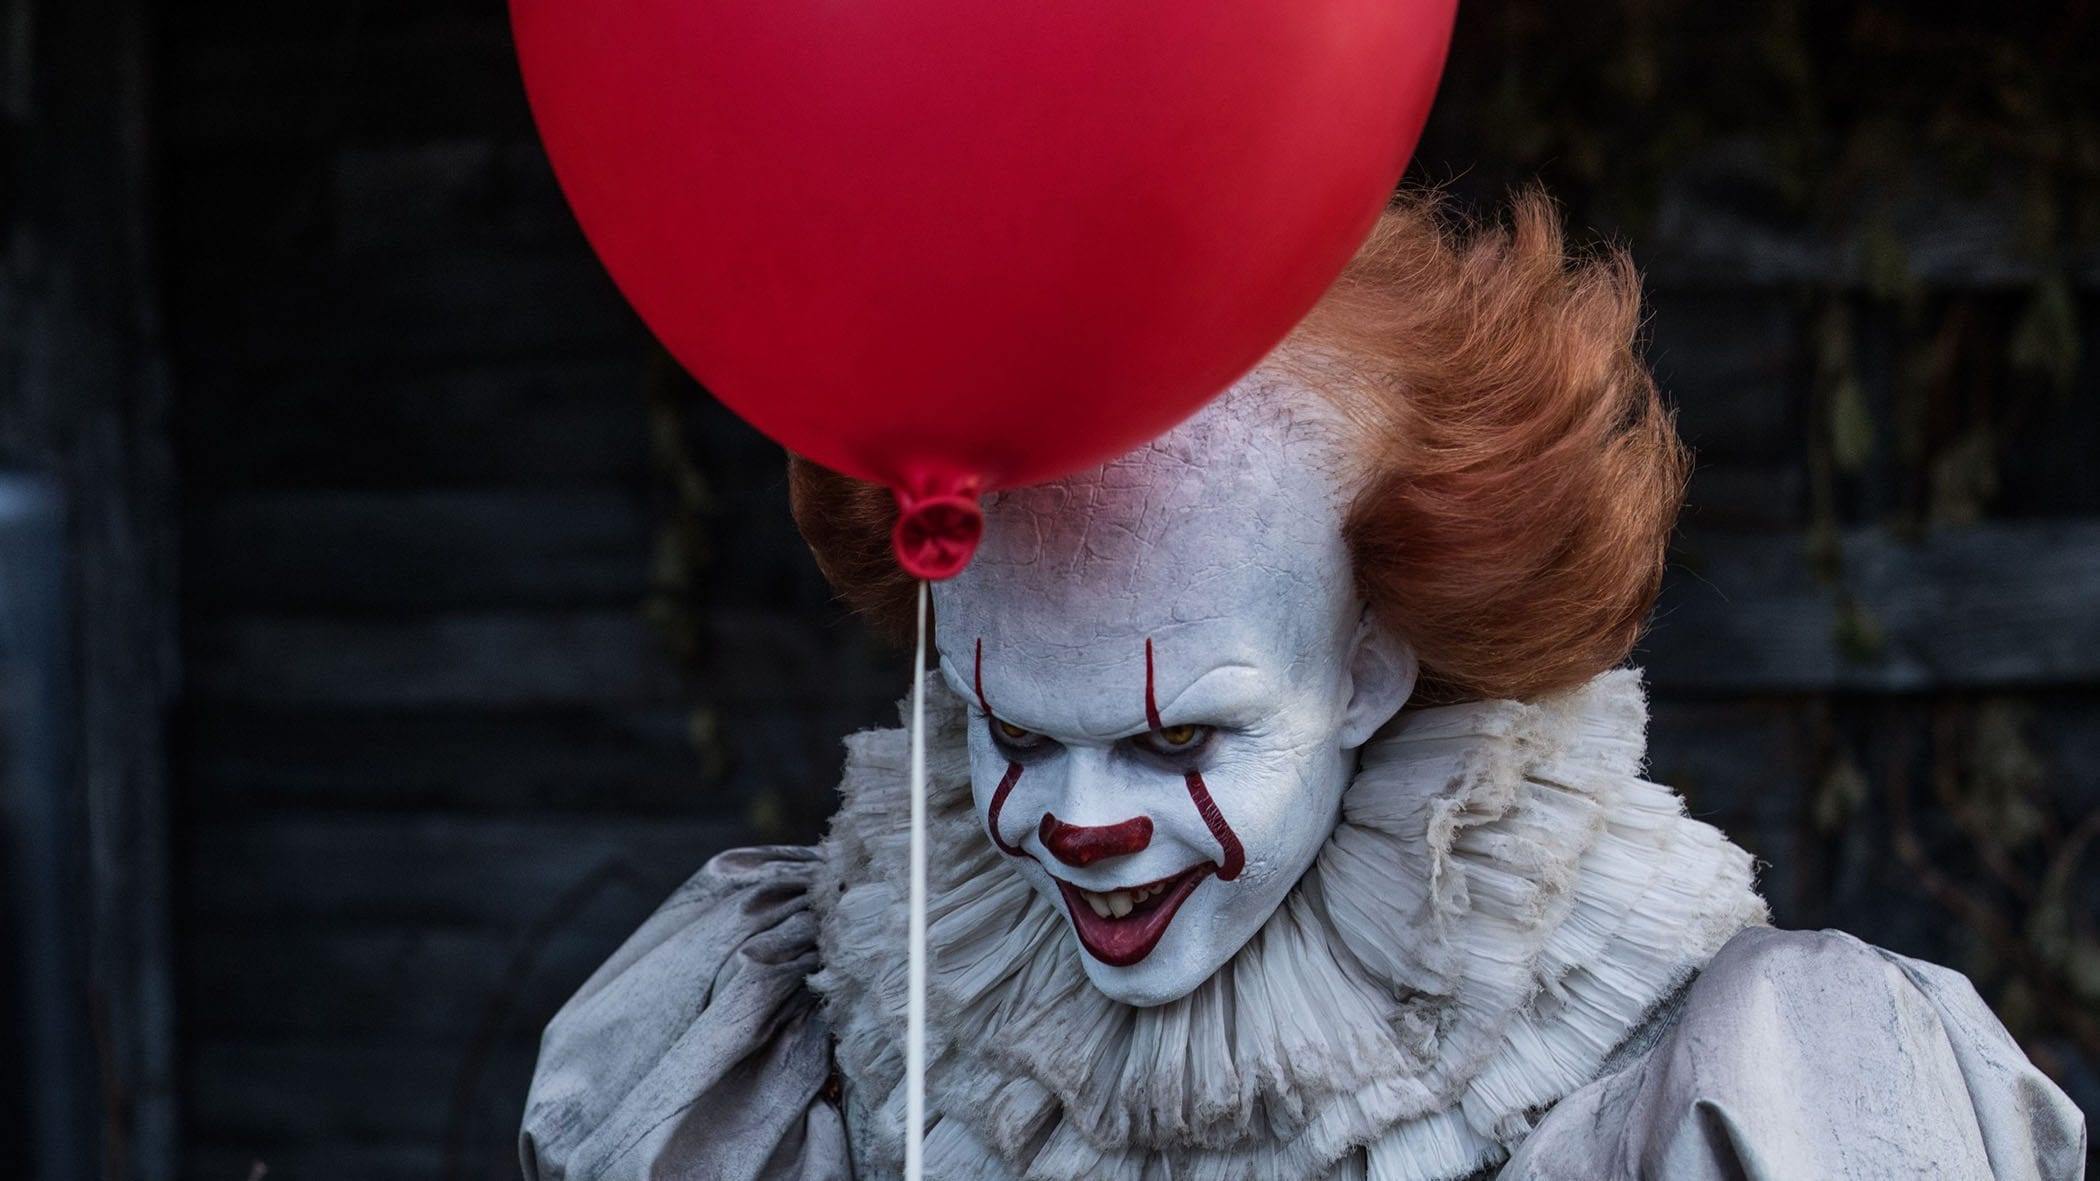 Now that Stephen King's 'It Chapter Two' has come and gone with a whimper, we're jonesing for some better horror.